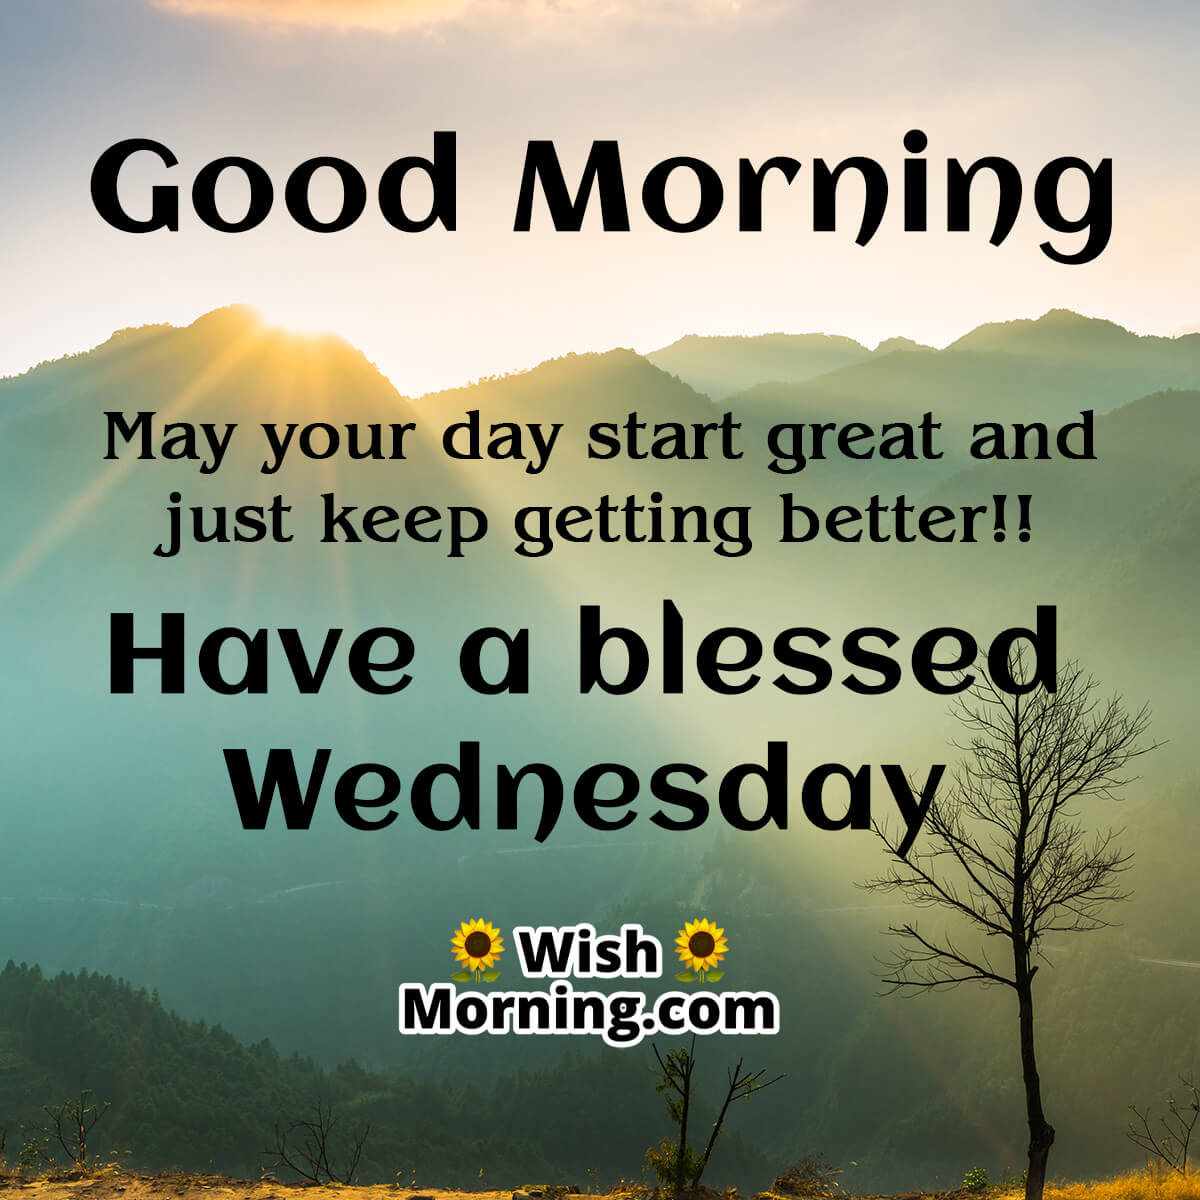 Good Morning Have A Blessed Wednesday Wish